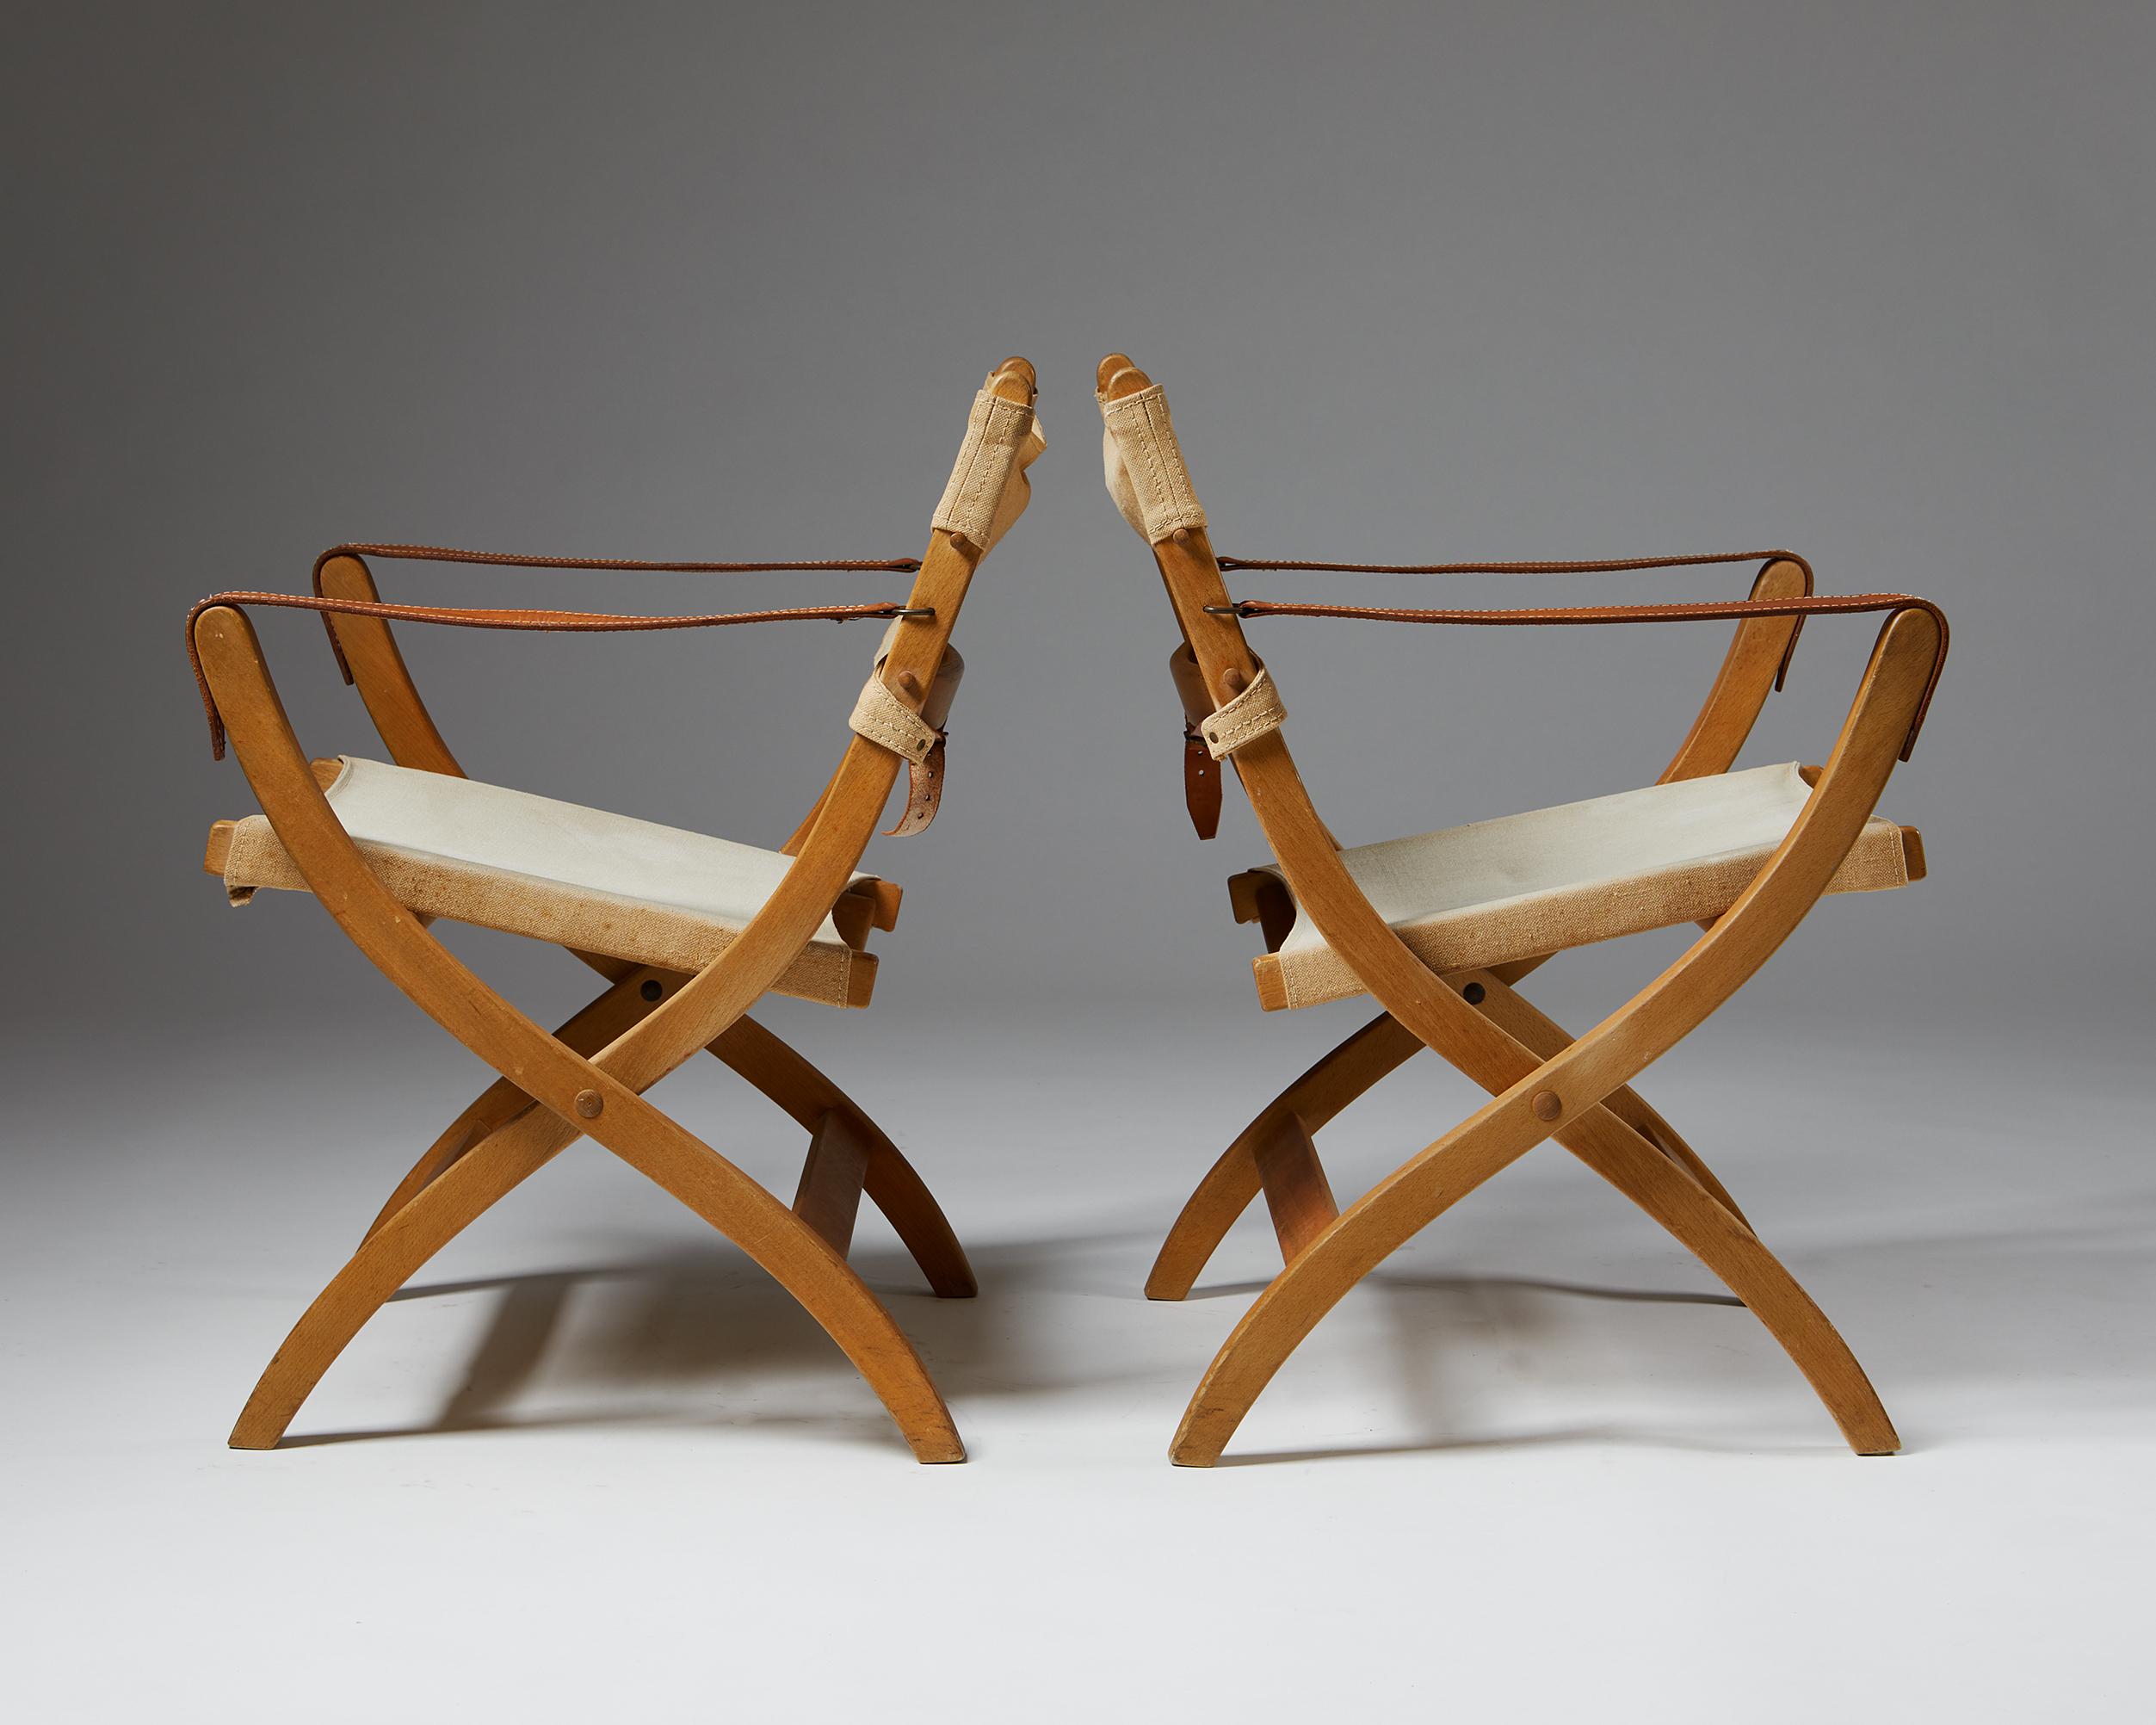 20th Century Pair of Folding Chairs Designed by Poul Hundevad for Vamdrup